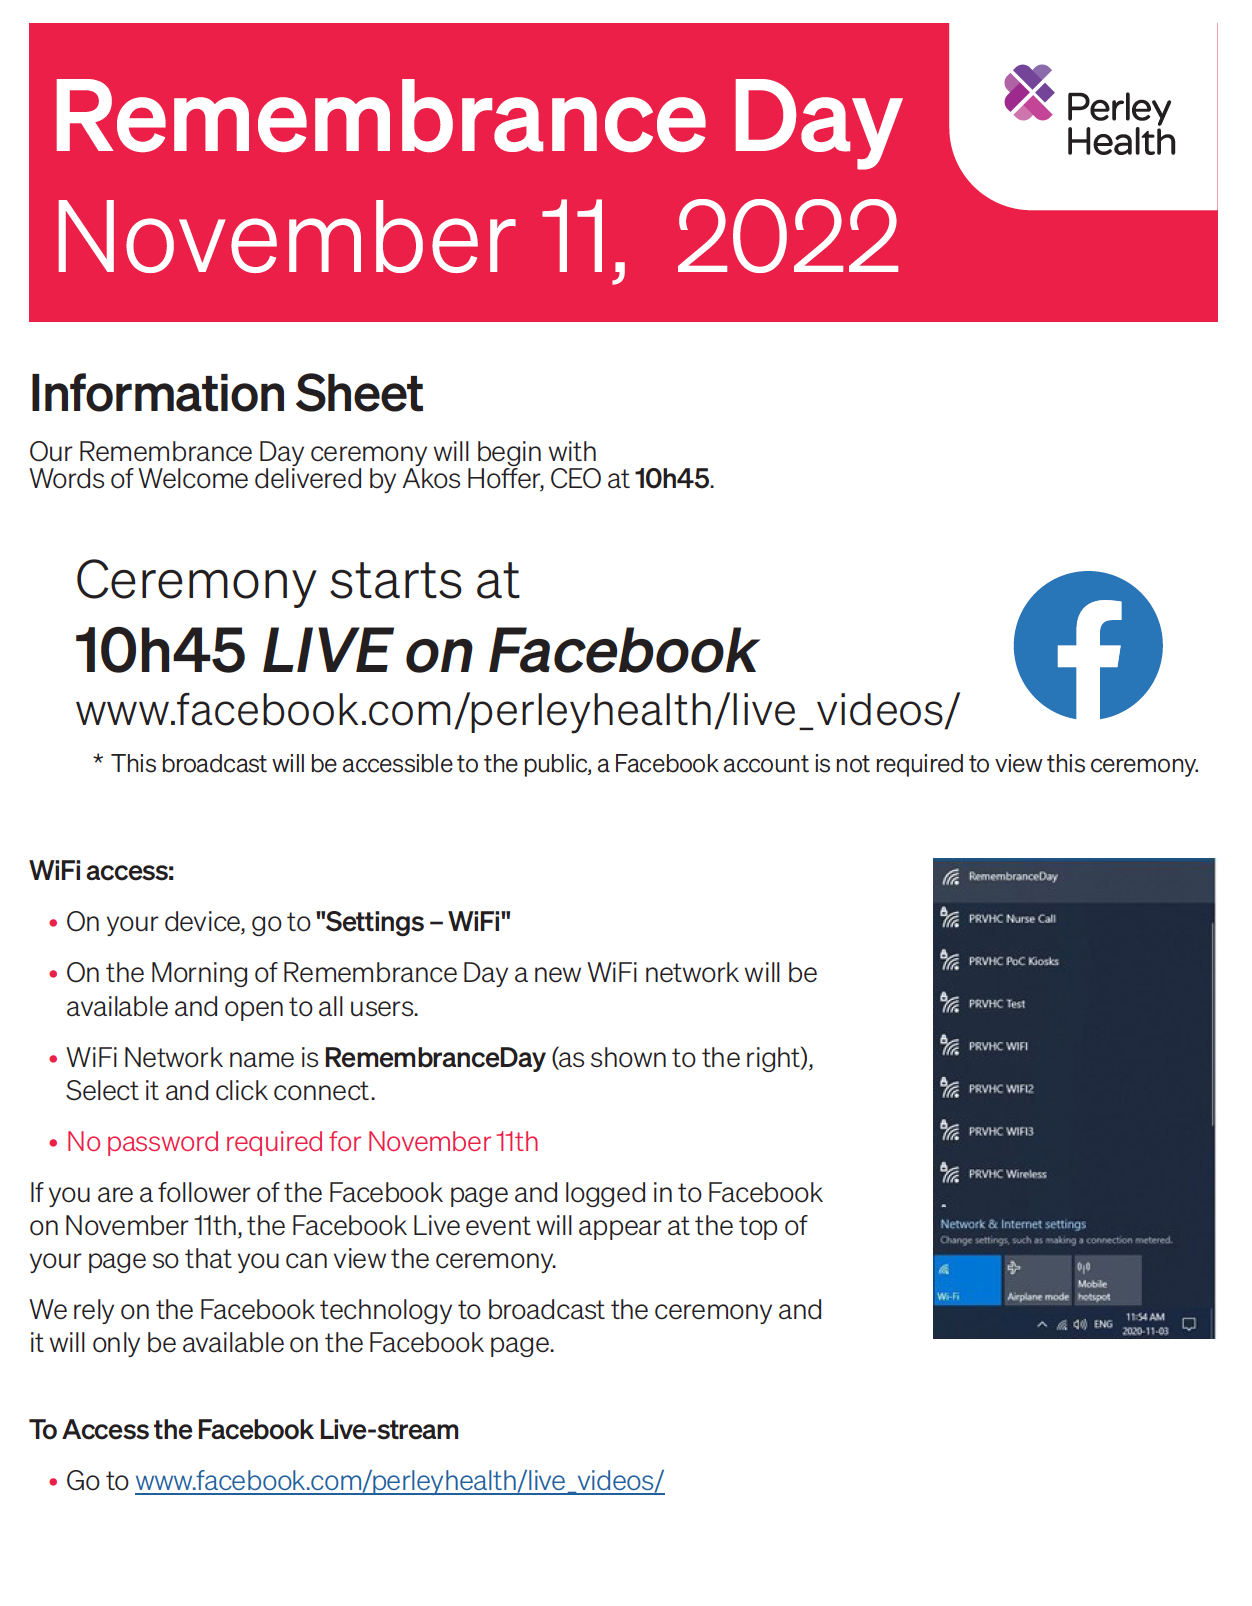 Rememberance Day Live, Access Information Poster